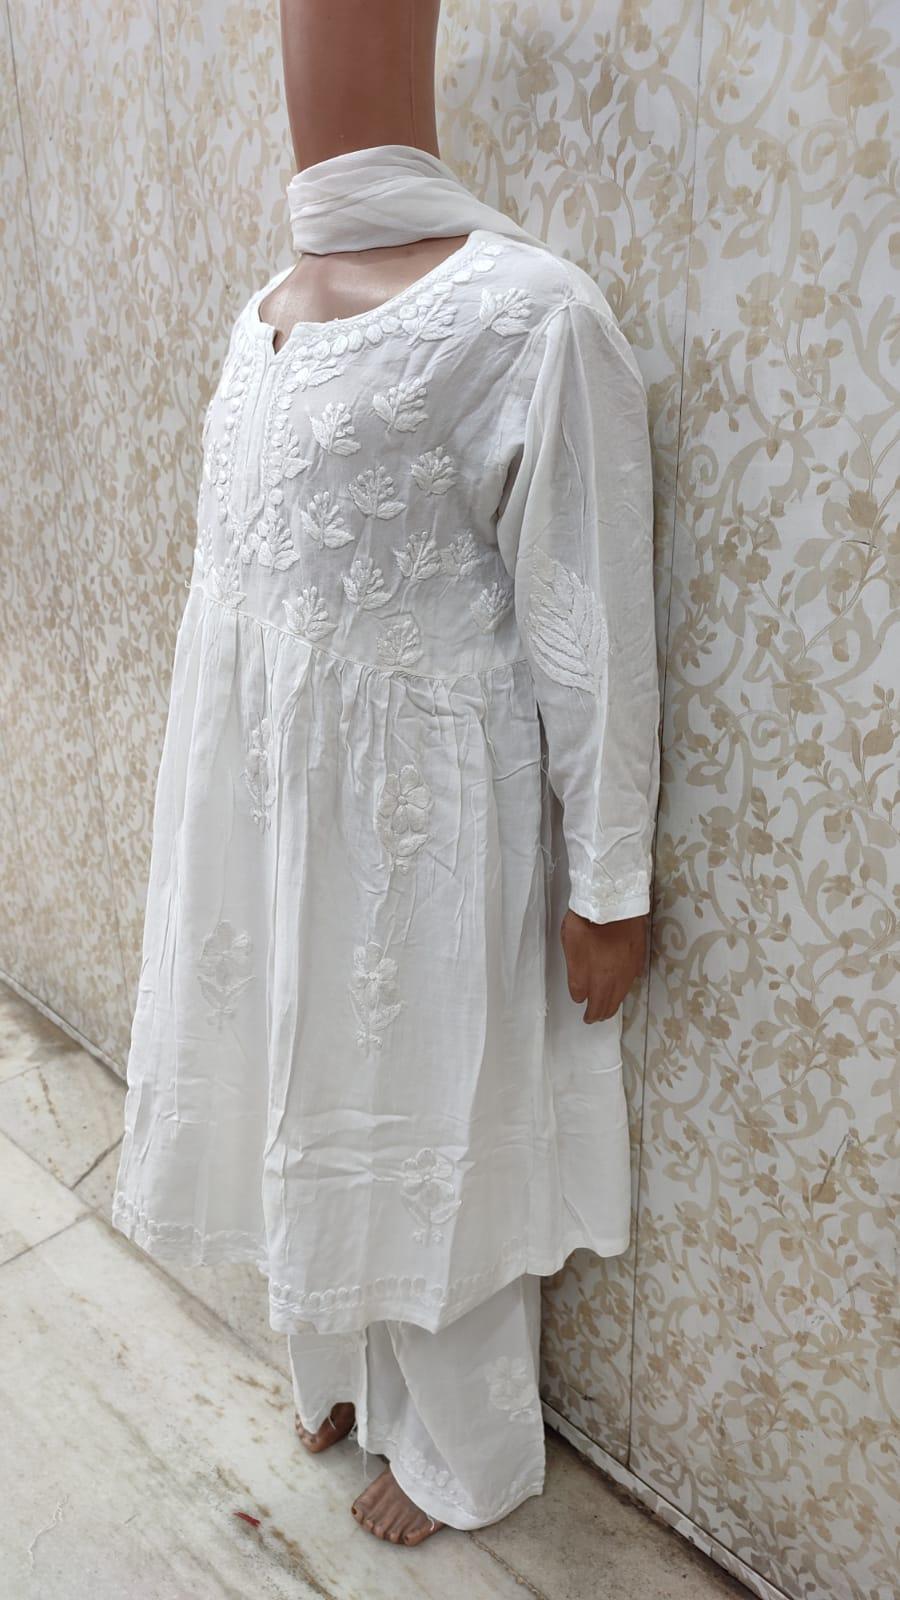 Pure White Lucknow Chikankari Delight Kids Wear Sets - Inayakhan Shop 